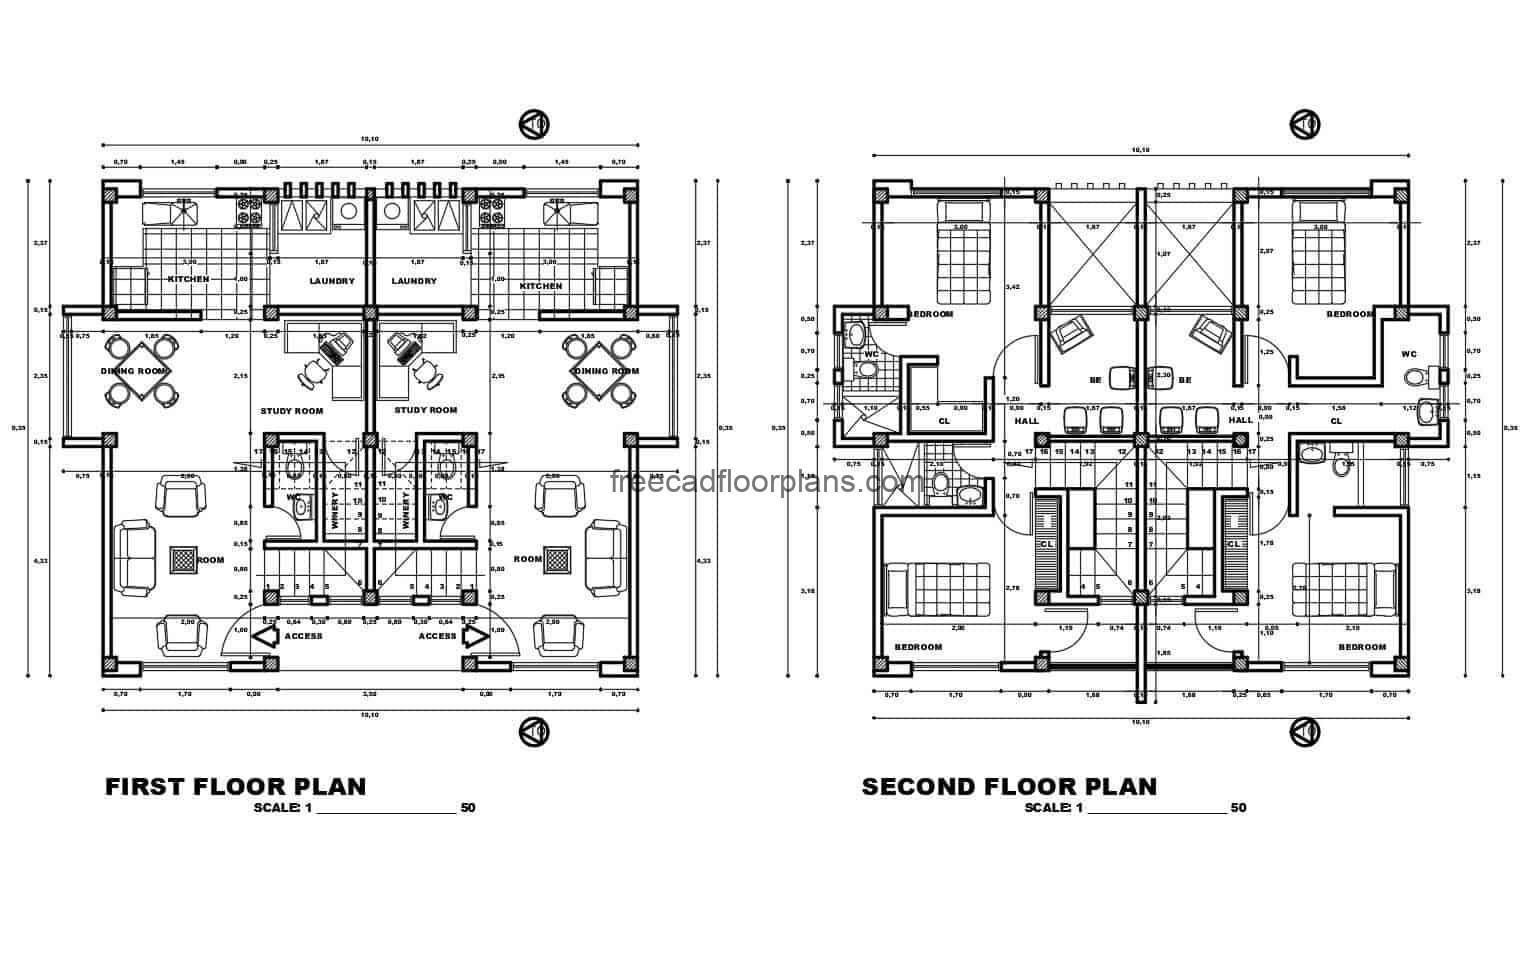 Architectural project with detail plans in DWG autocad format, of a duplex family house on two levels, facades, floors with details and dwg blocks for free download